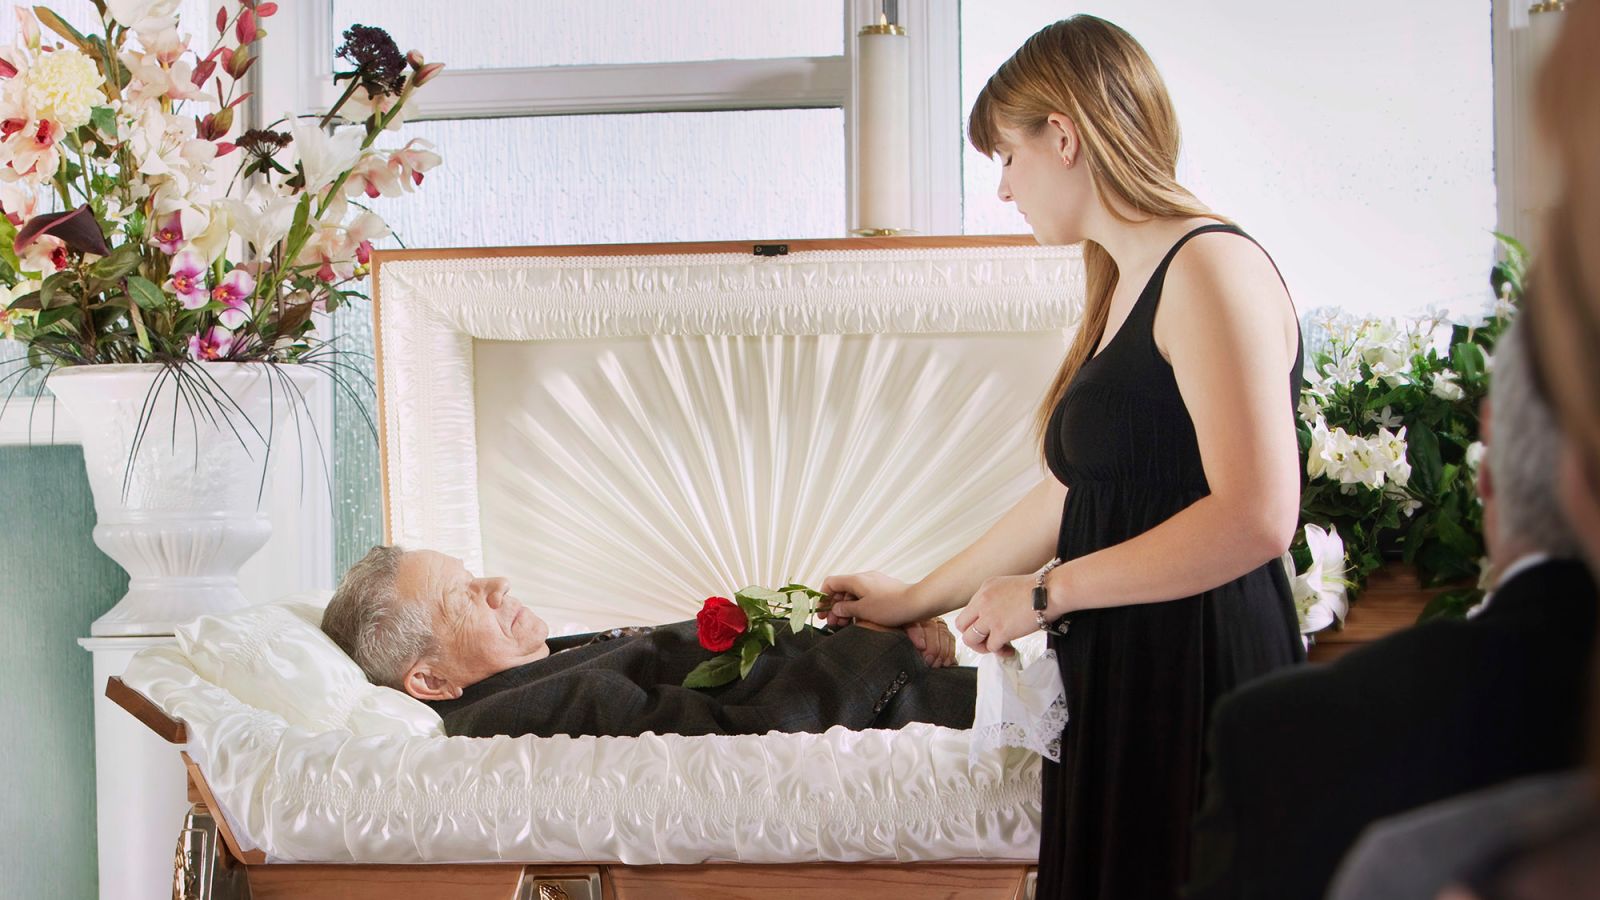 Open Casket Really Ruining Vibe At Funeral. 